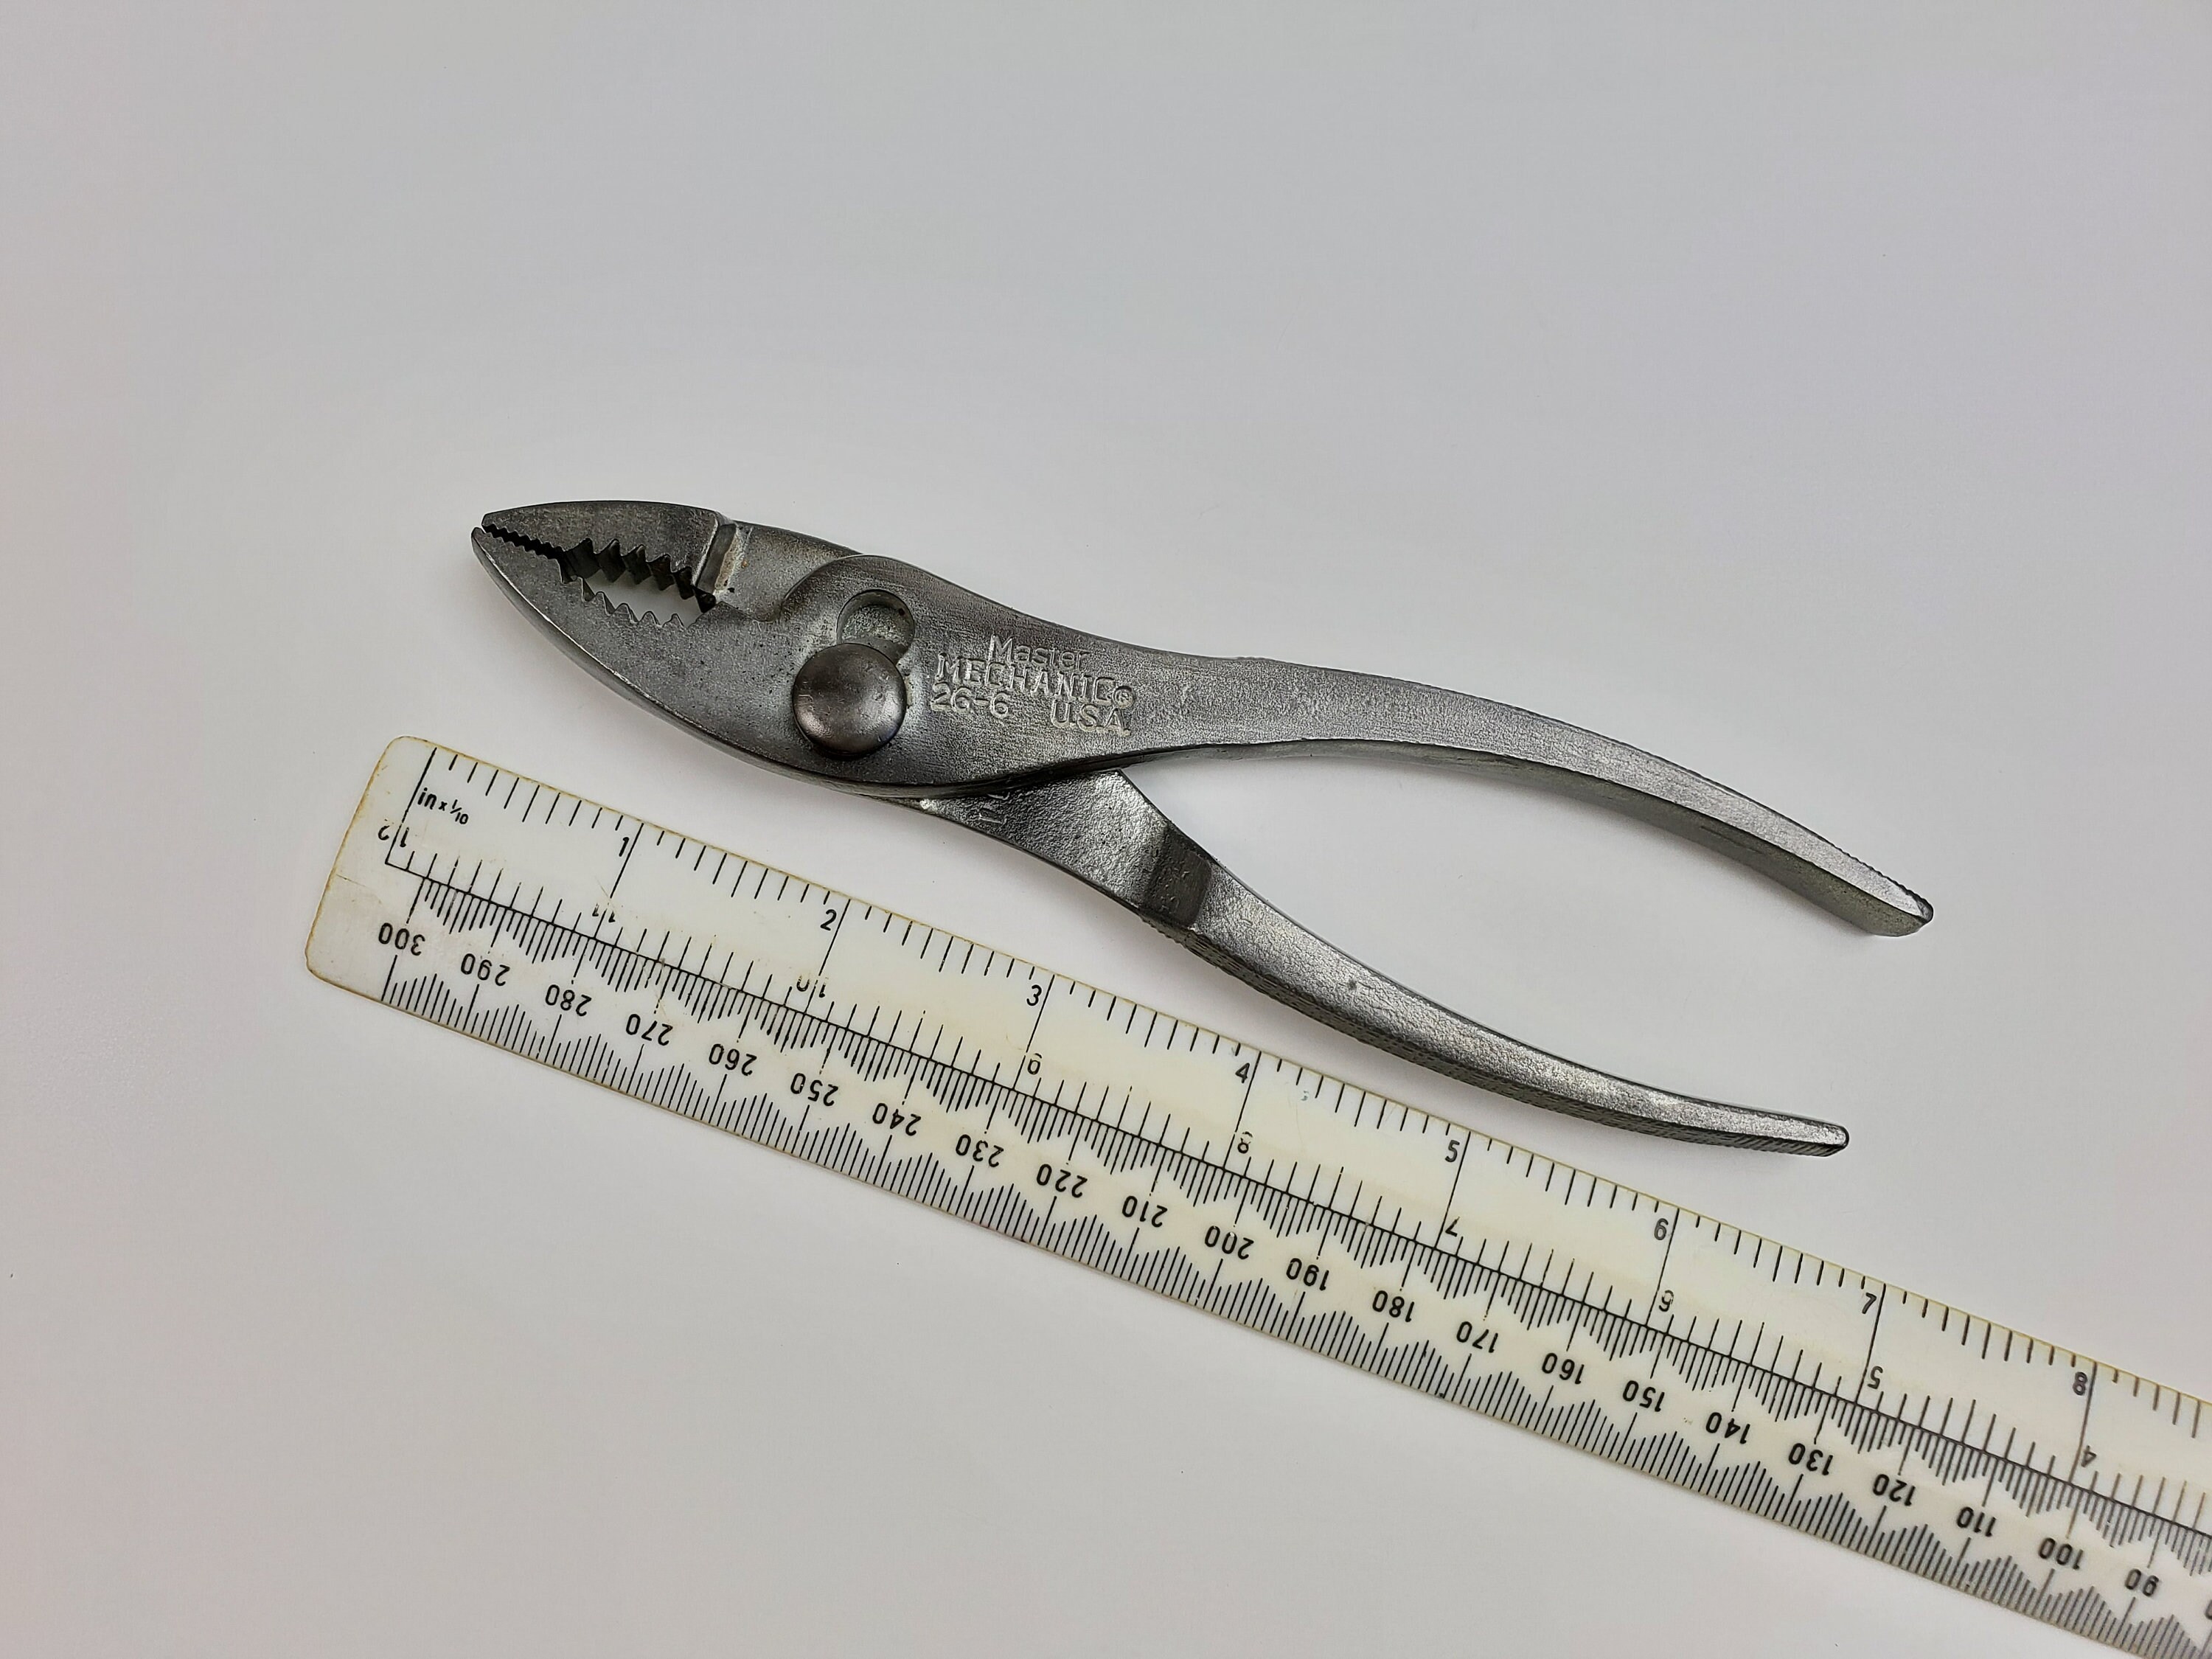 Vintage Sheers Plyers Pliers with Curl Handle 6.75 long